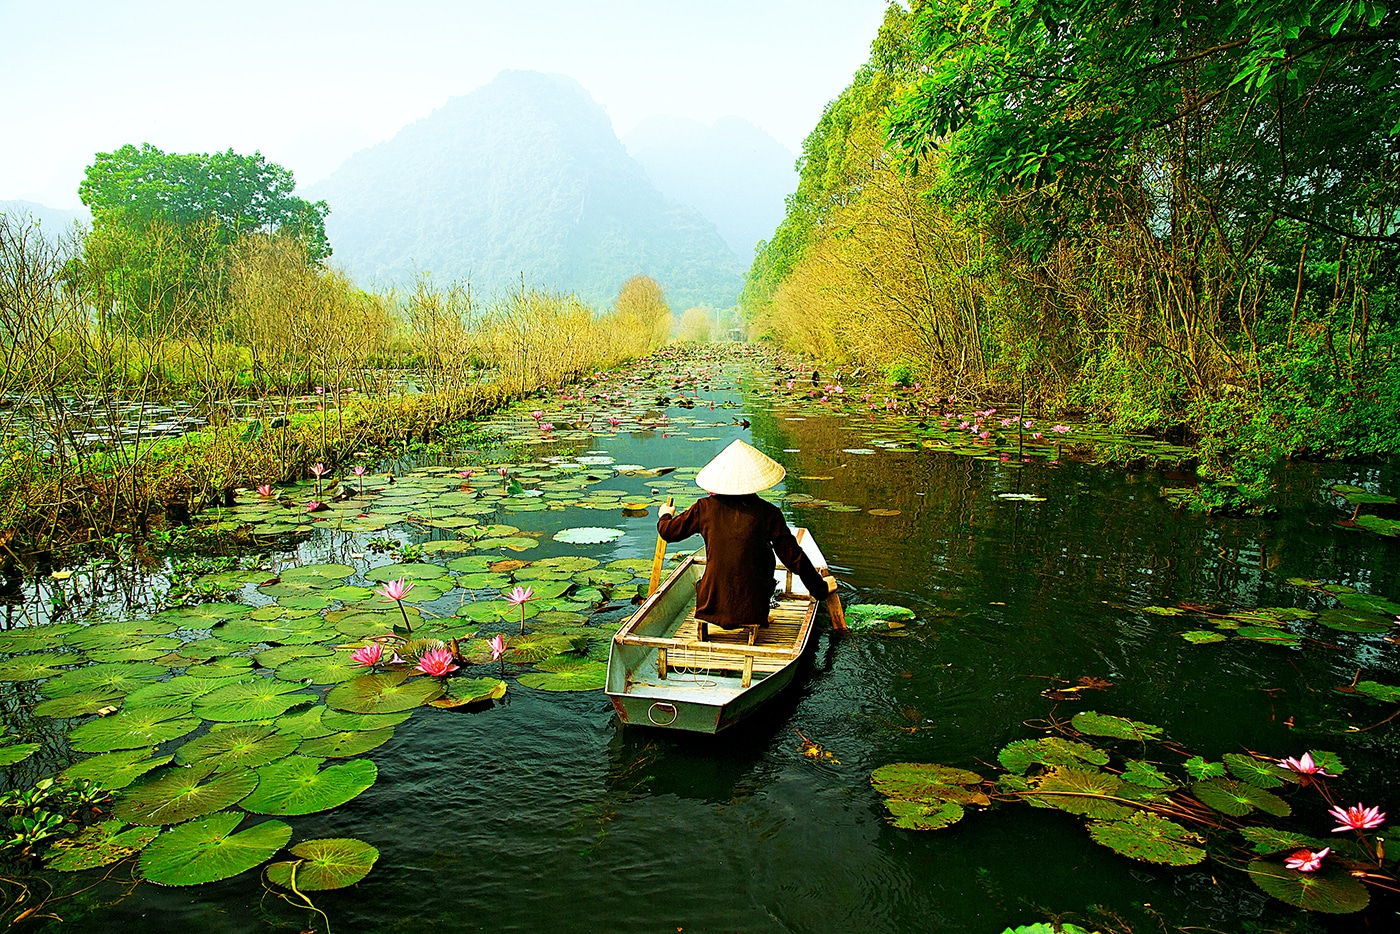 A woman paddling down a river full of lily pads on a canoe